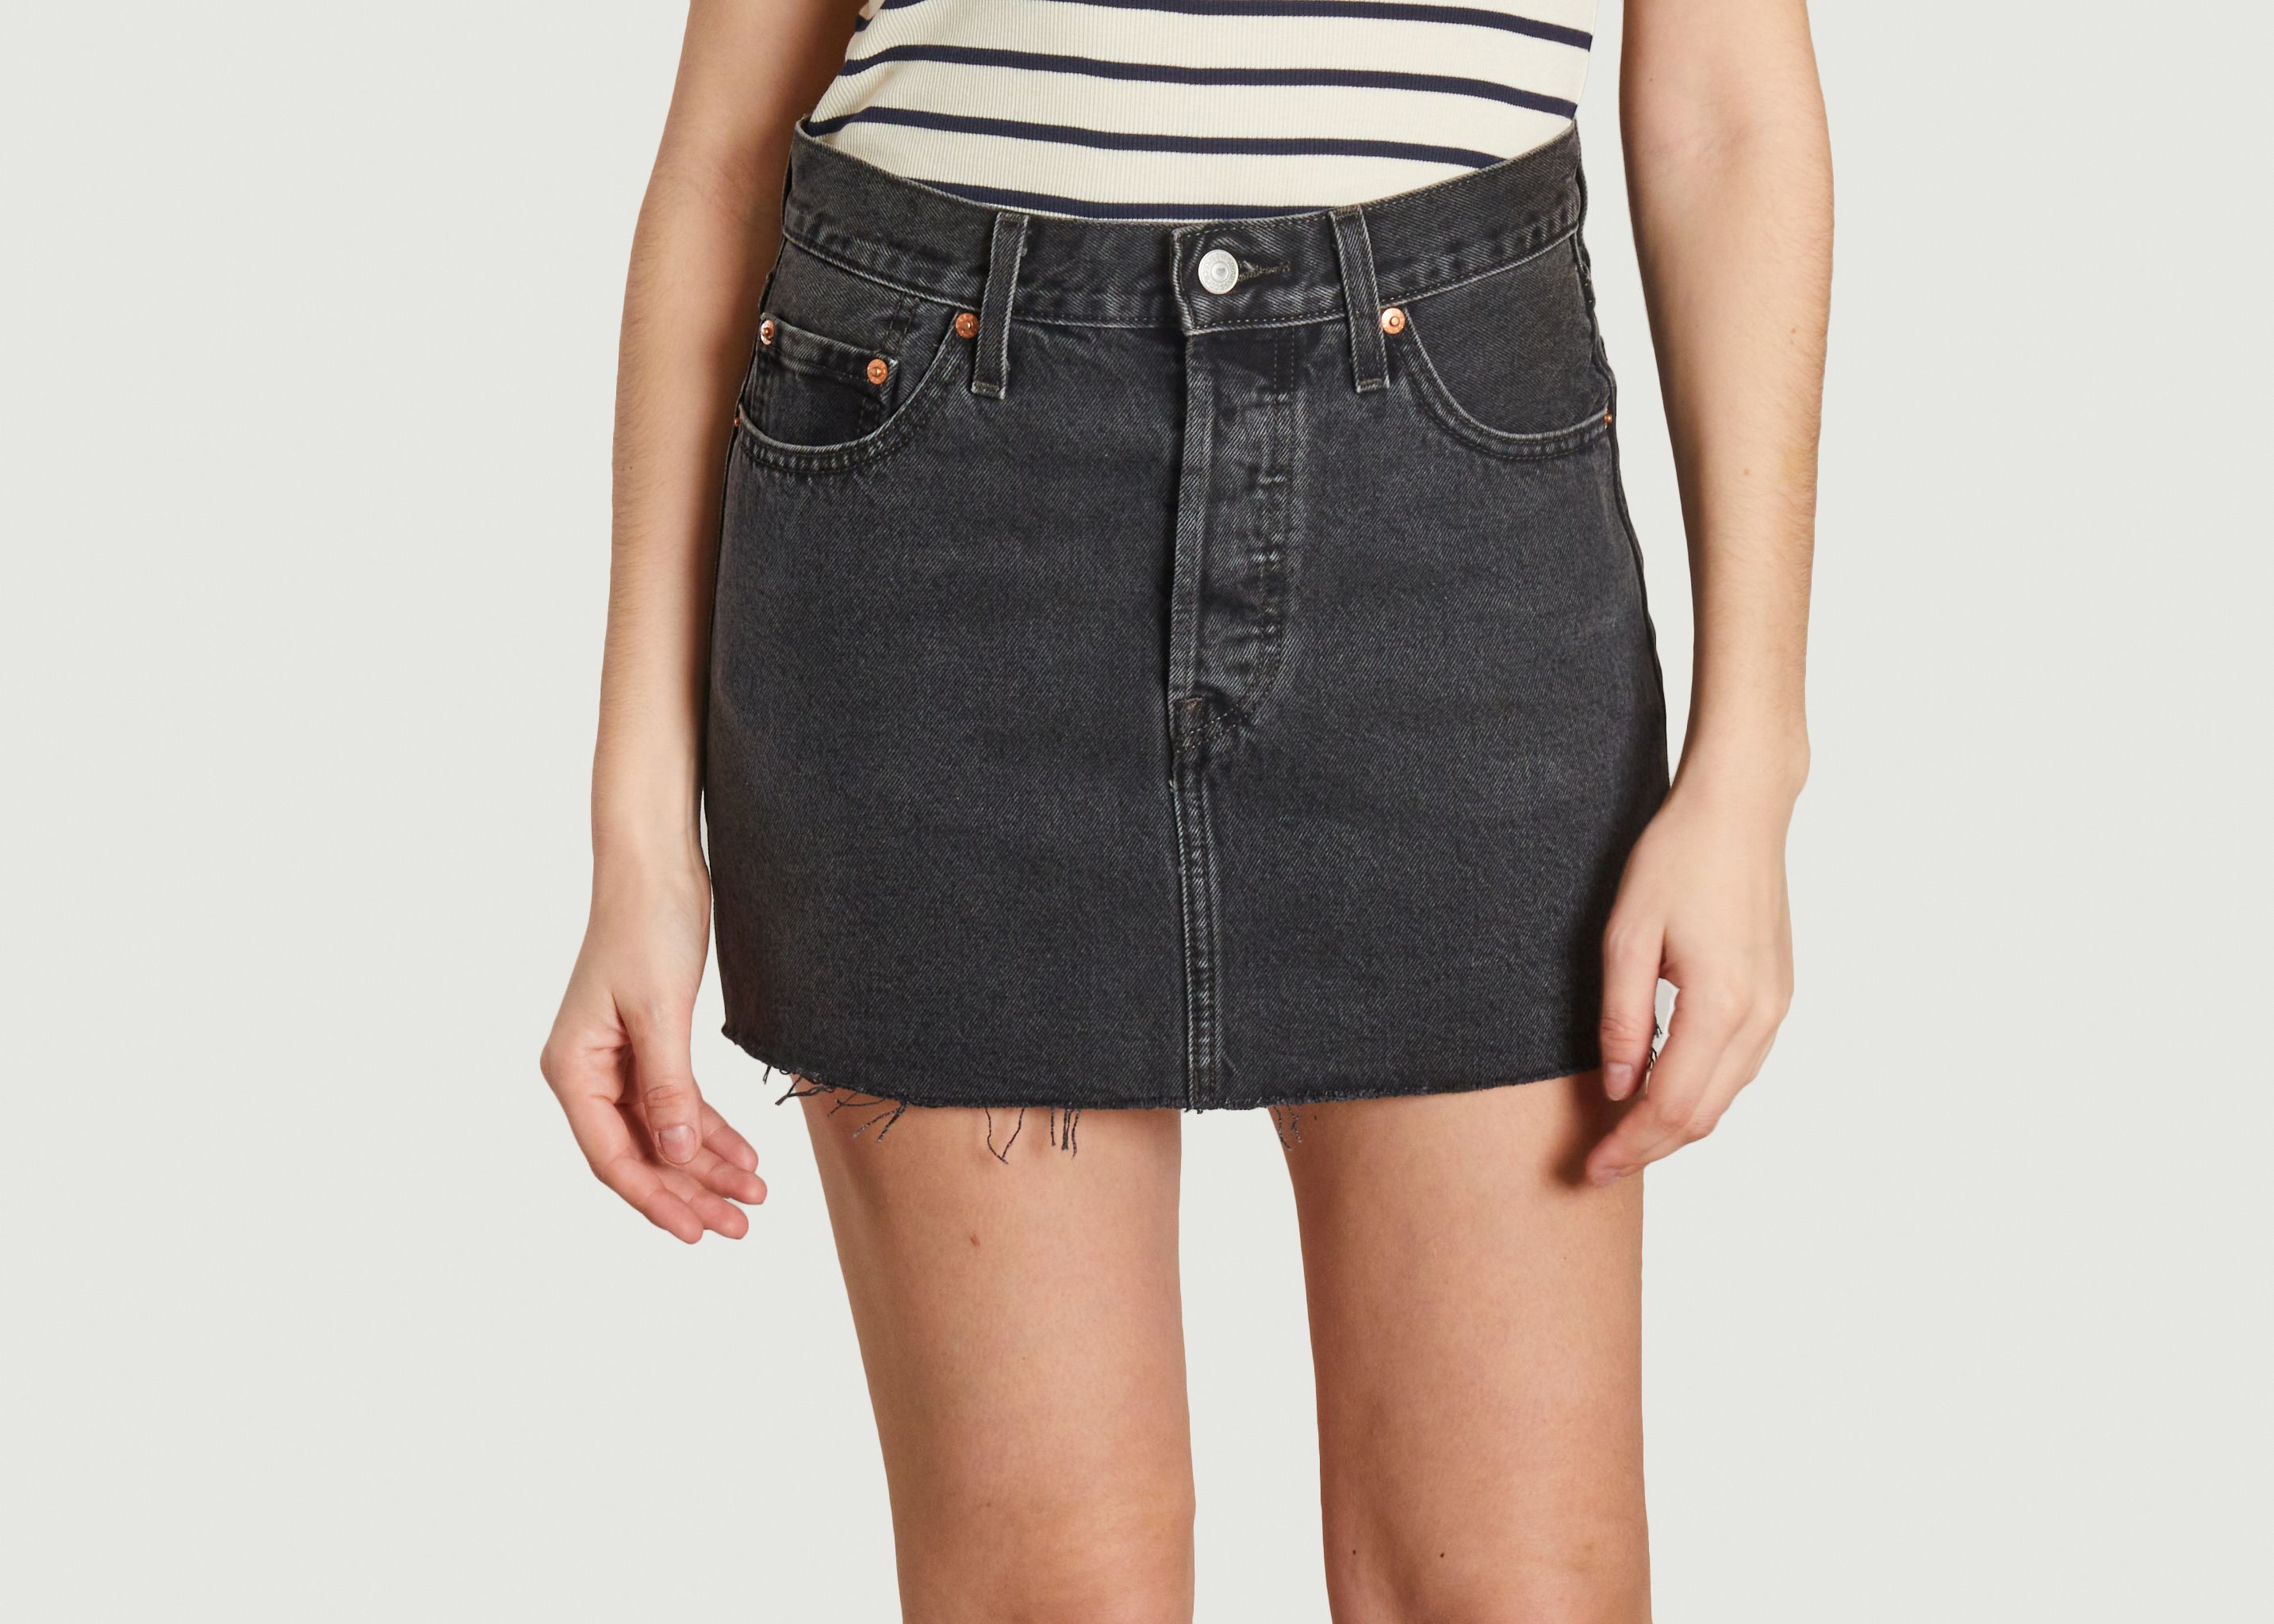 Short skirt in Icon dyed denim - Levi's Red Tab